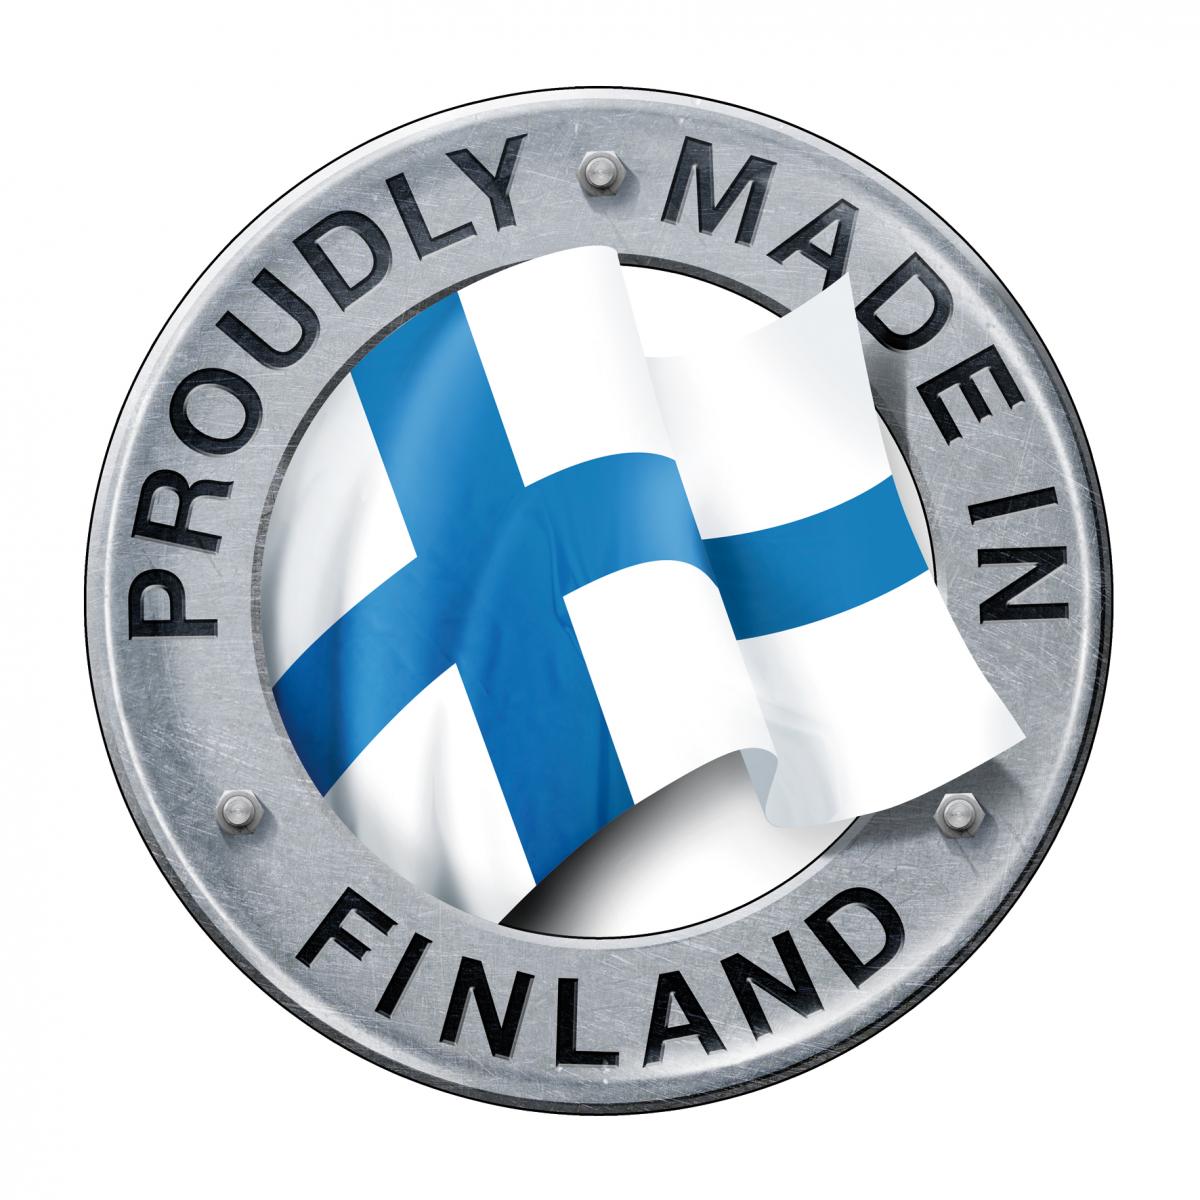 Proudly made in Finland